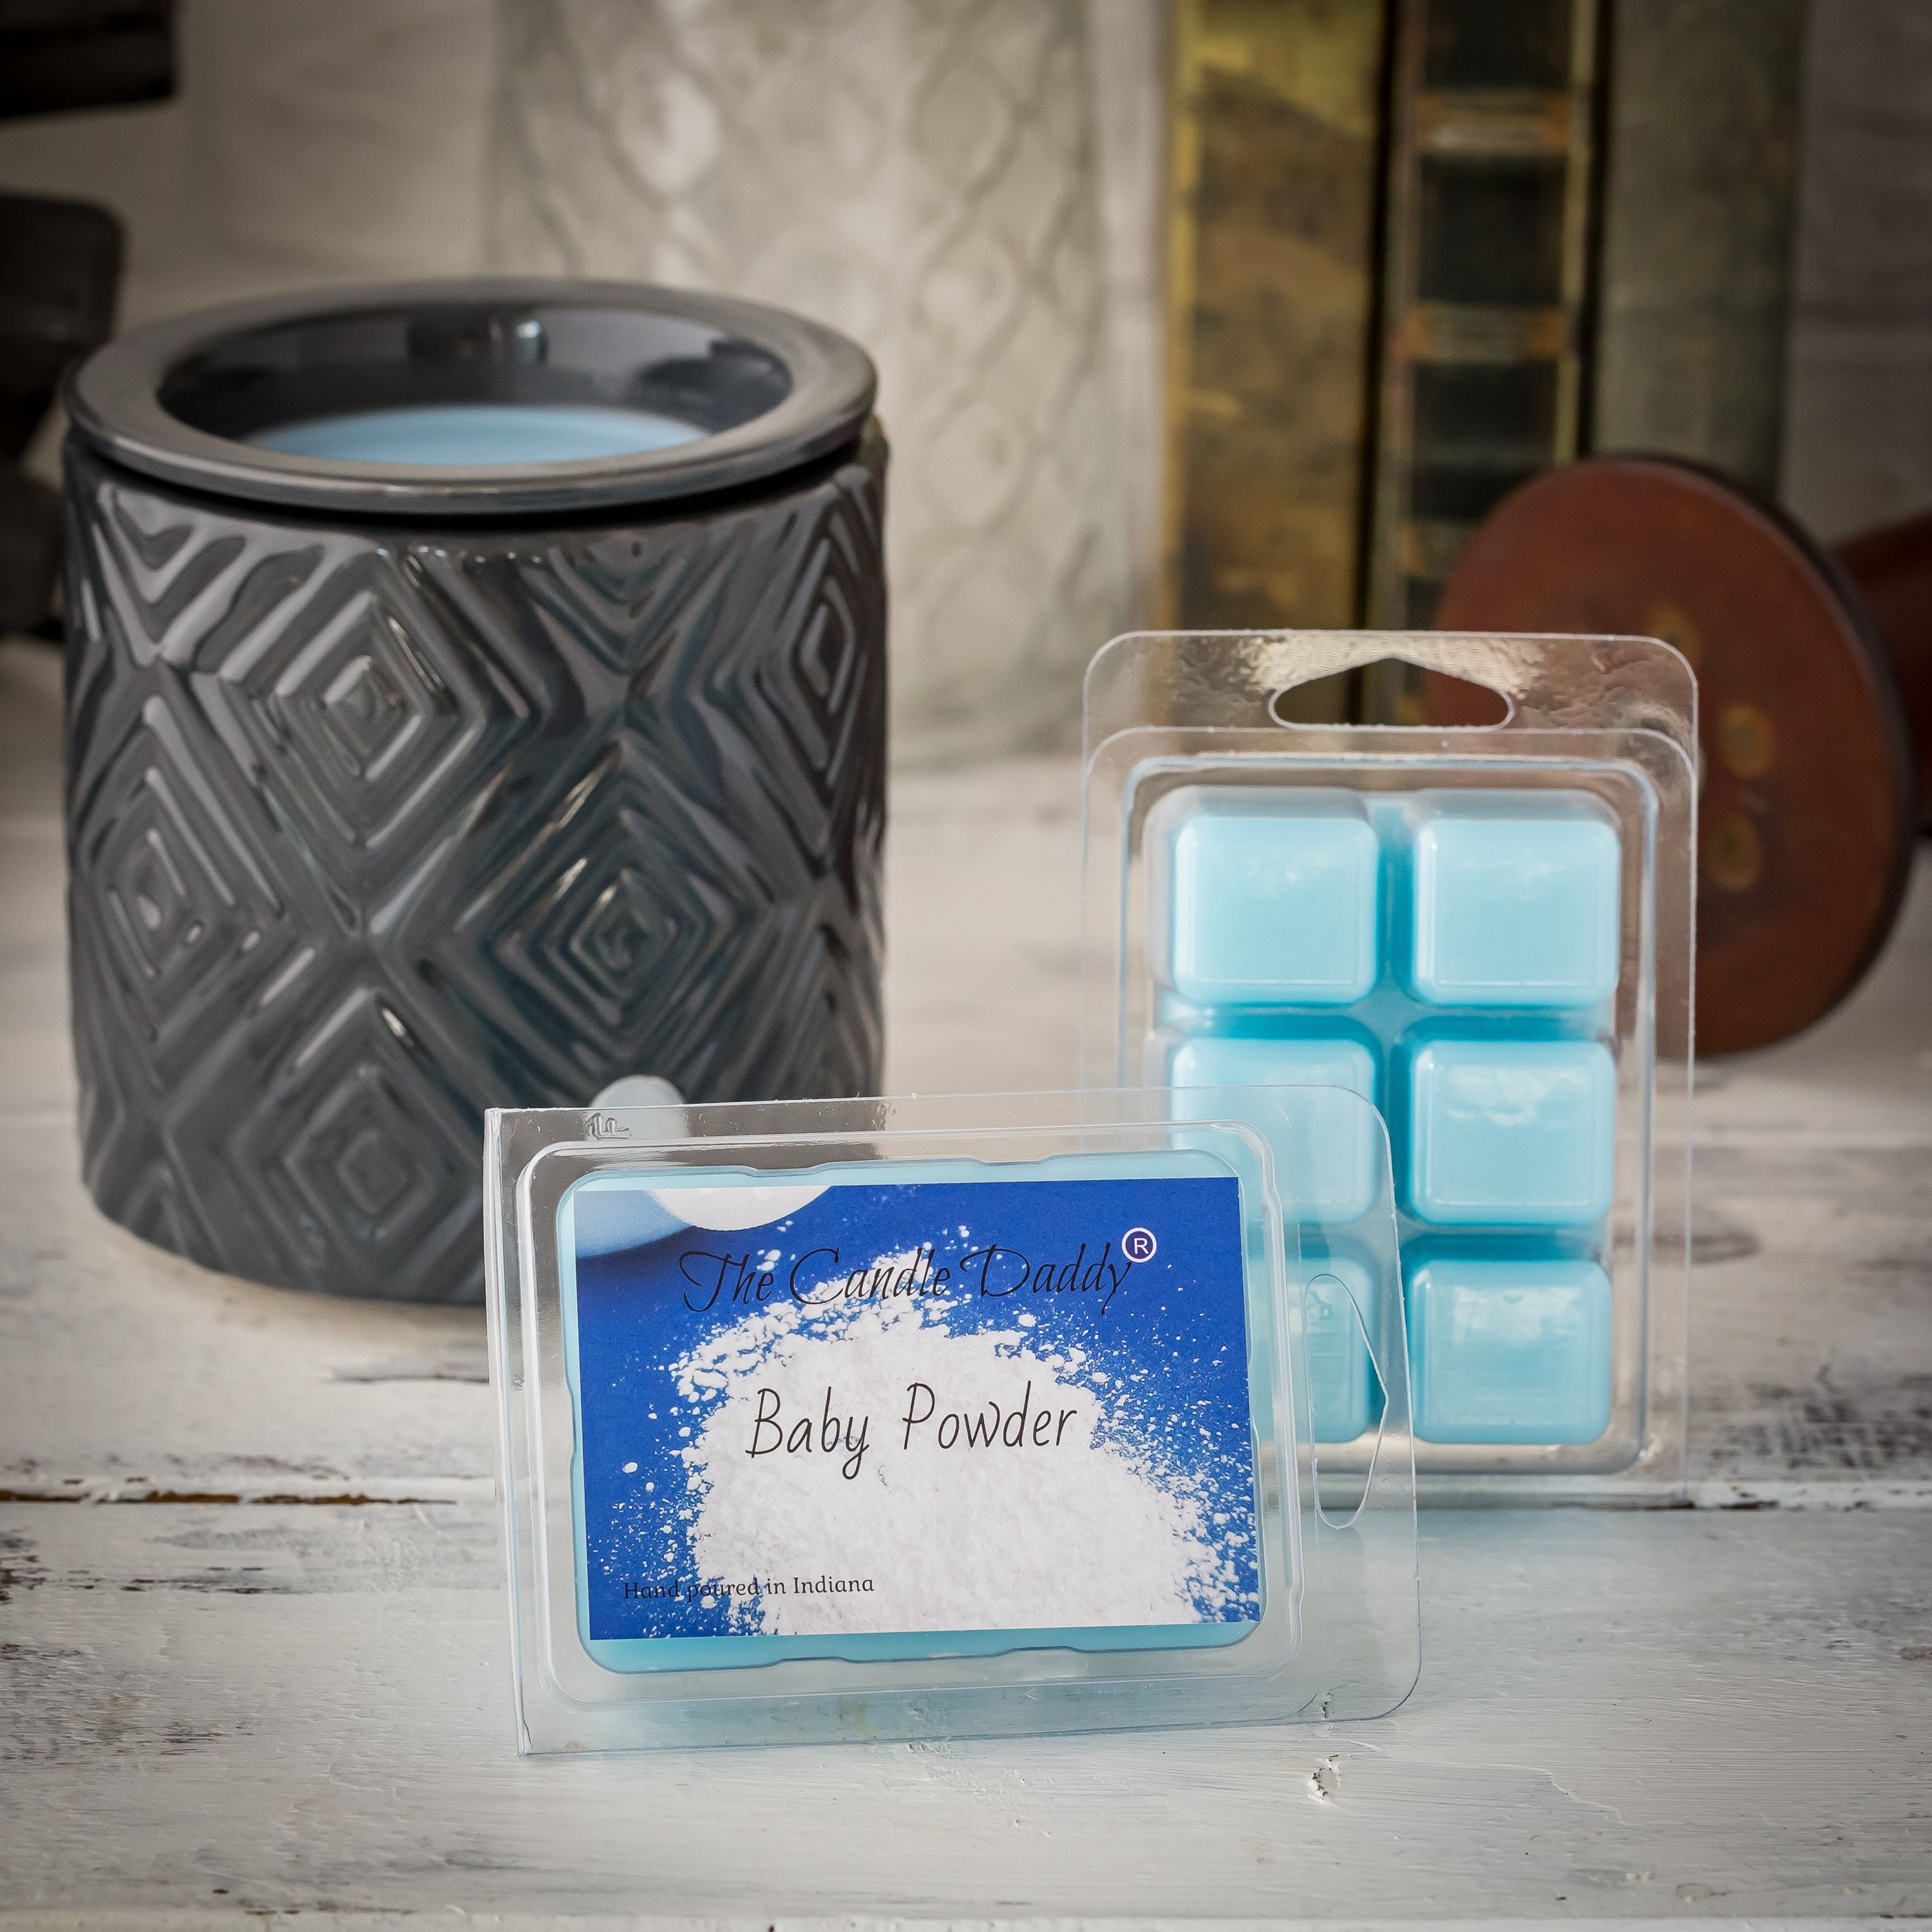  Scented Wax Melts, Baby Powder Scent, STRONGLY SCENTED WAX  MELTS, Wax Melts Wax Cubes Strong Scent, HANDMADE, Candle Melts Wax Cubes, USA Made